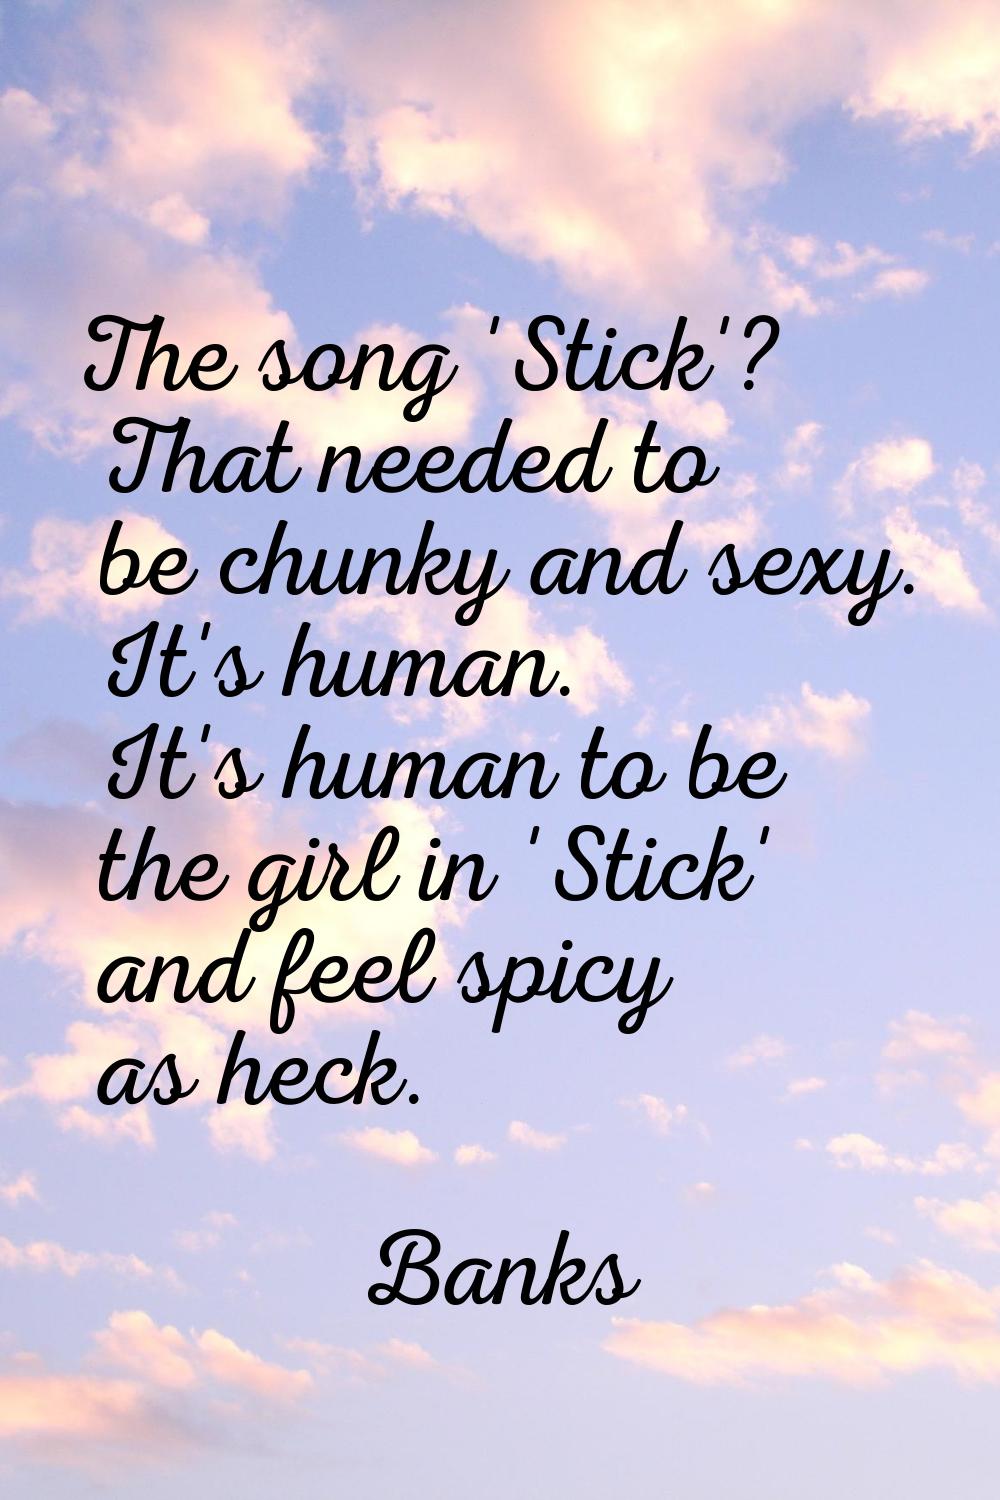 The song 'Stick'? That needed to be chunky and sexy. It's human. It's human to be the girl in 'Stic